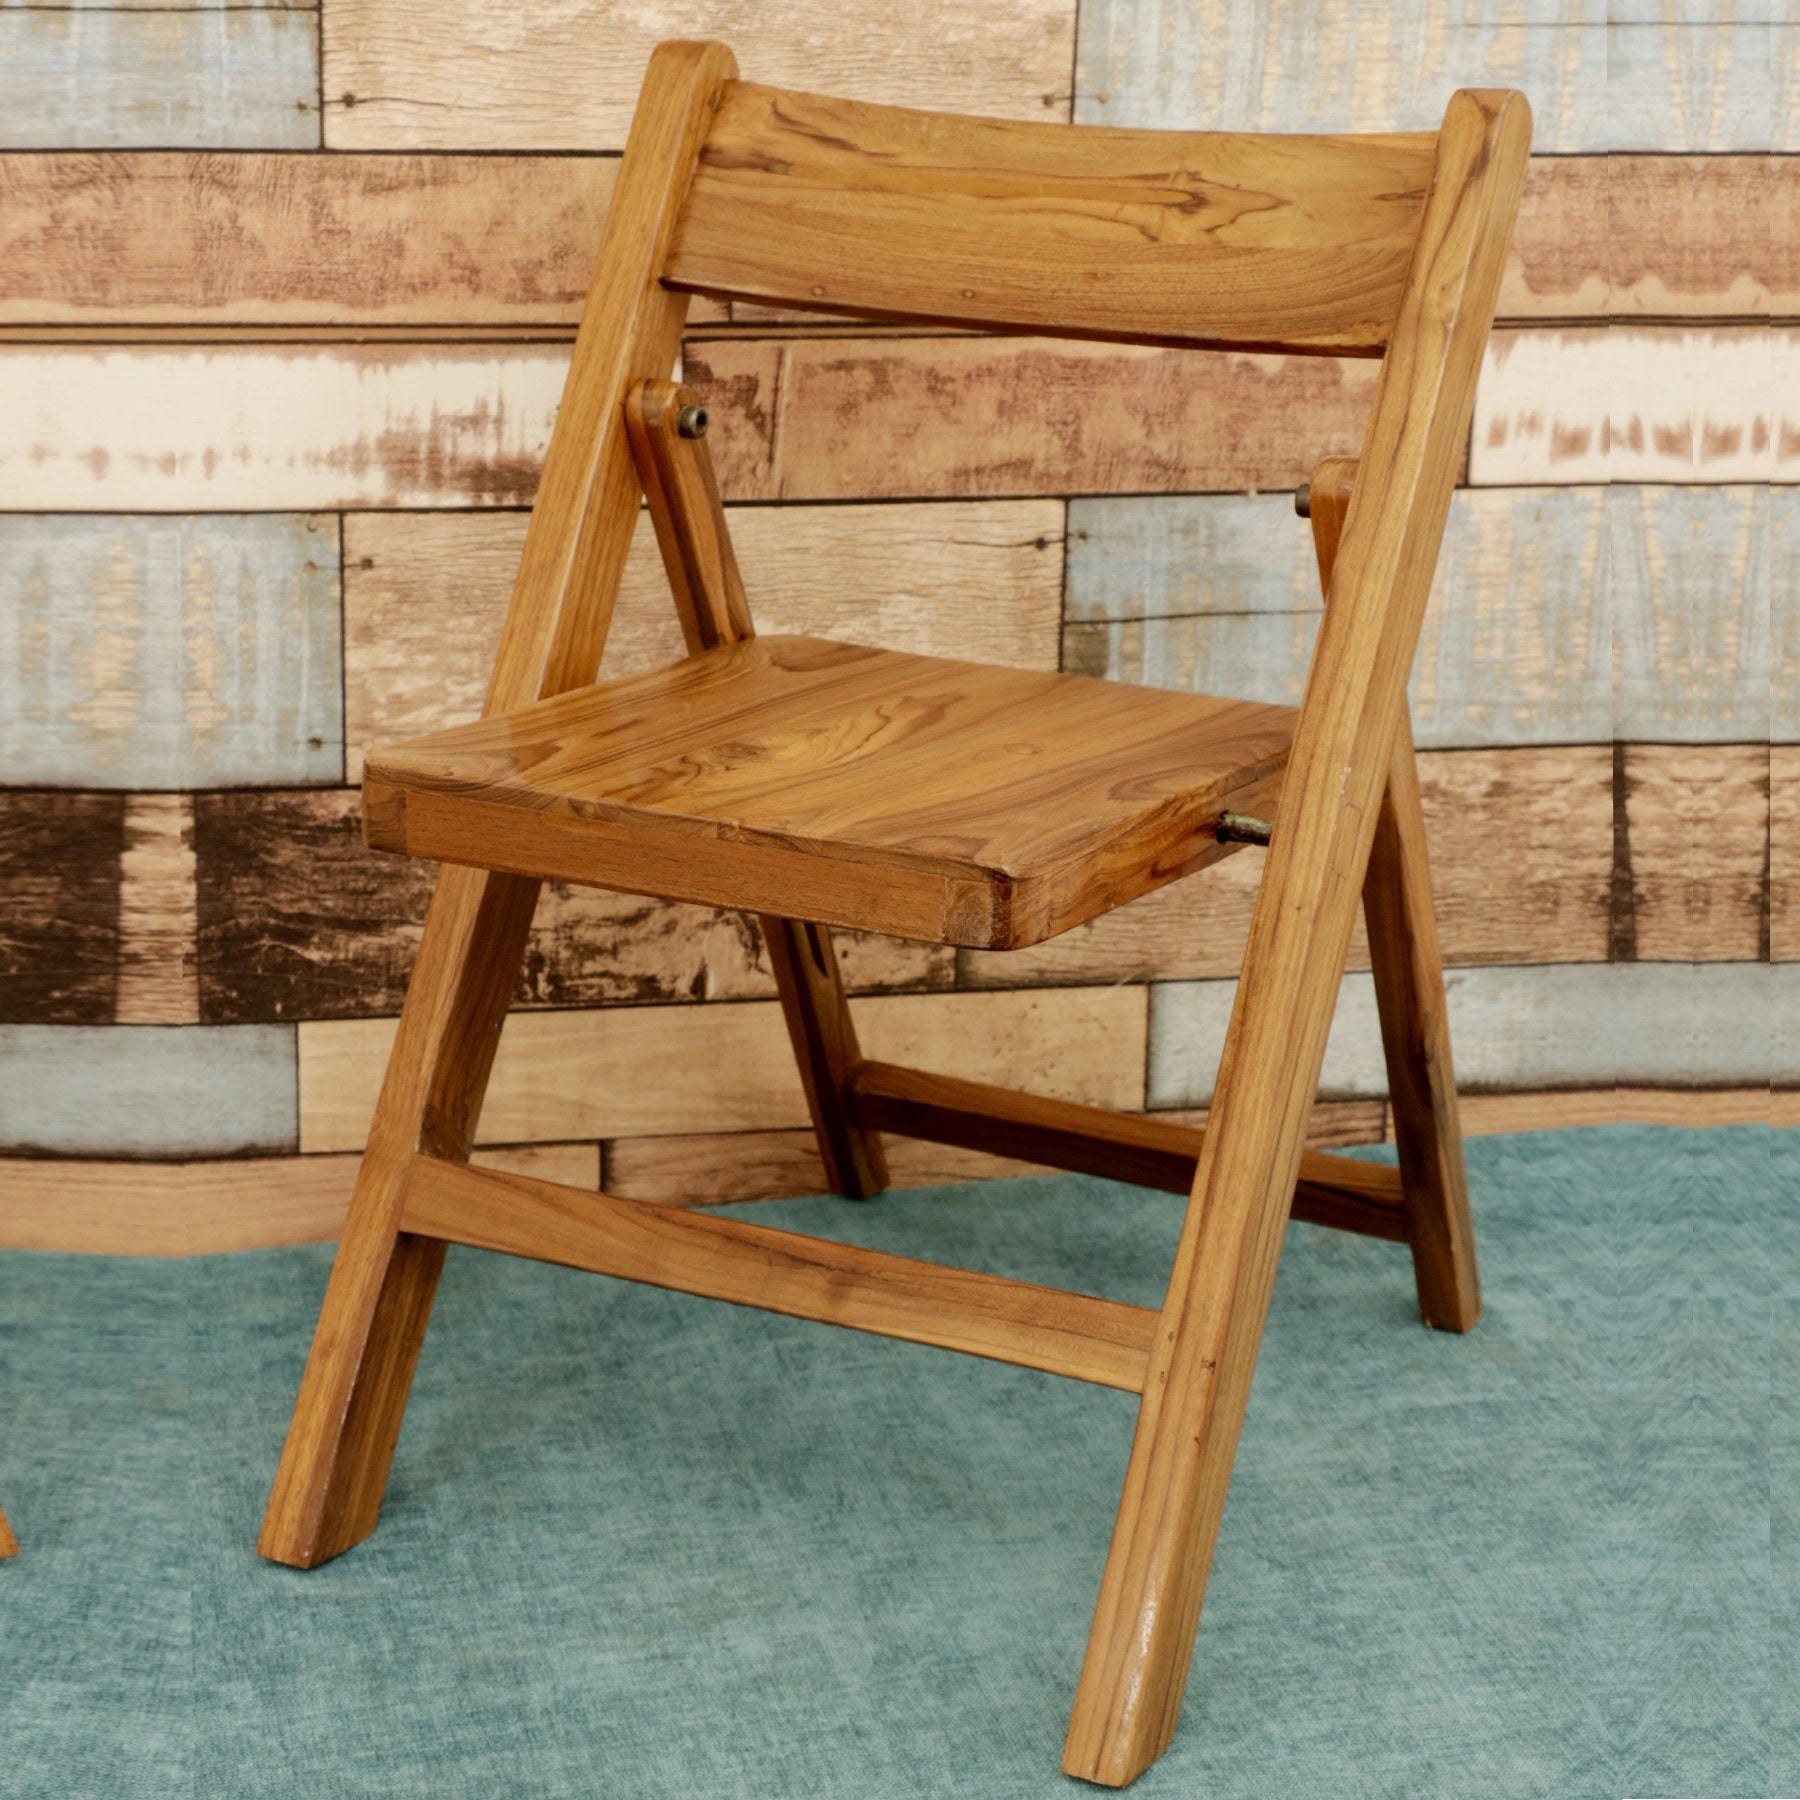 7 Ways to Completely Revamp Your Wooden Chair